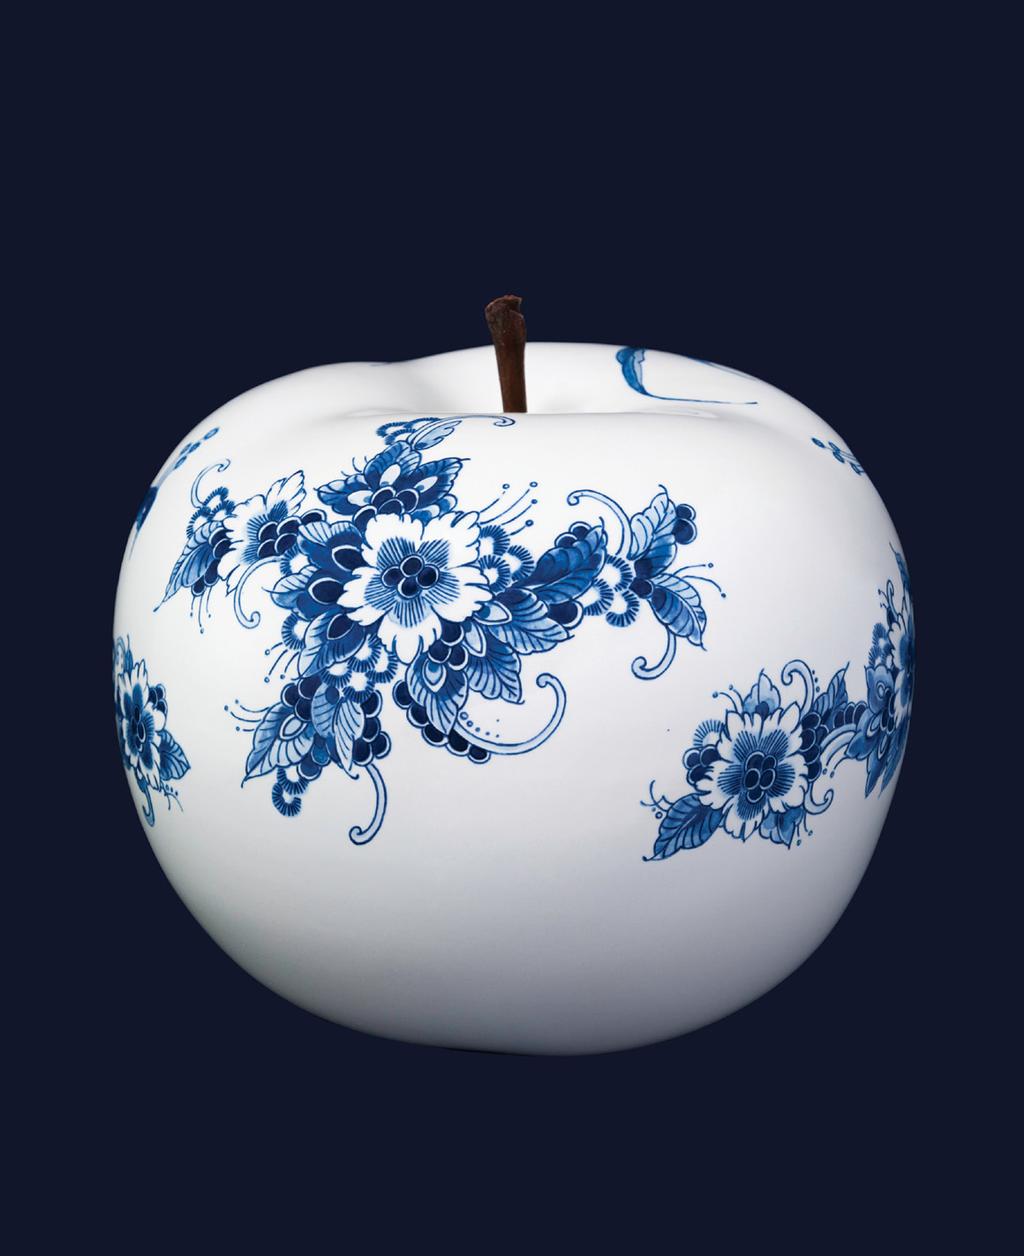 THE SERIES CUSTOM MADE 6 The Series consists of four different sizes (ø 5, 12, The variation in style and design, which is custom made 7 20 and 29 cm) ceramic apples with designs by by the master